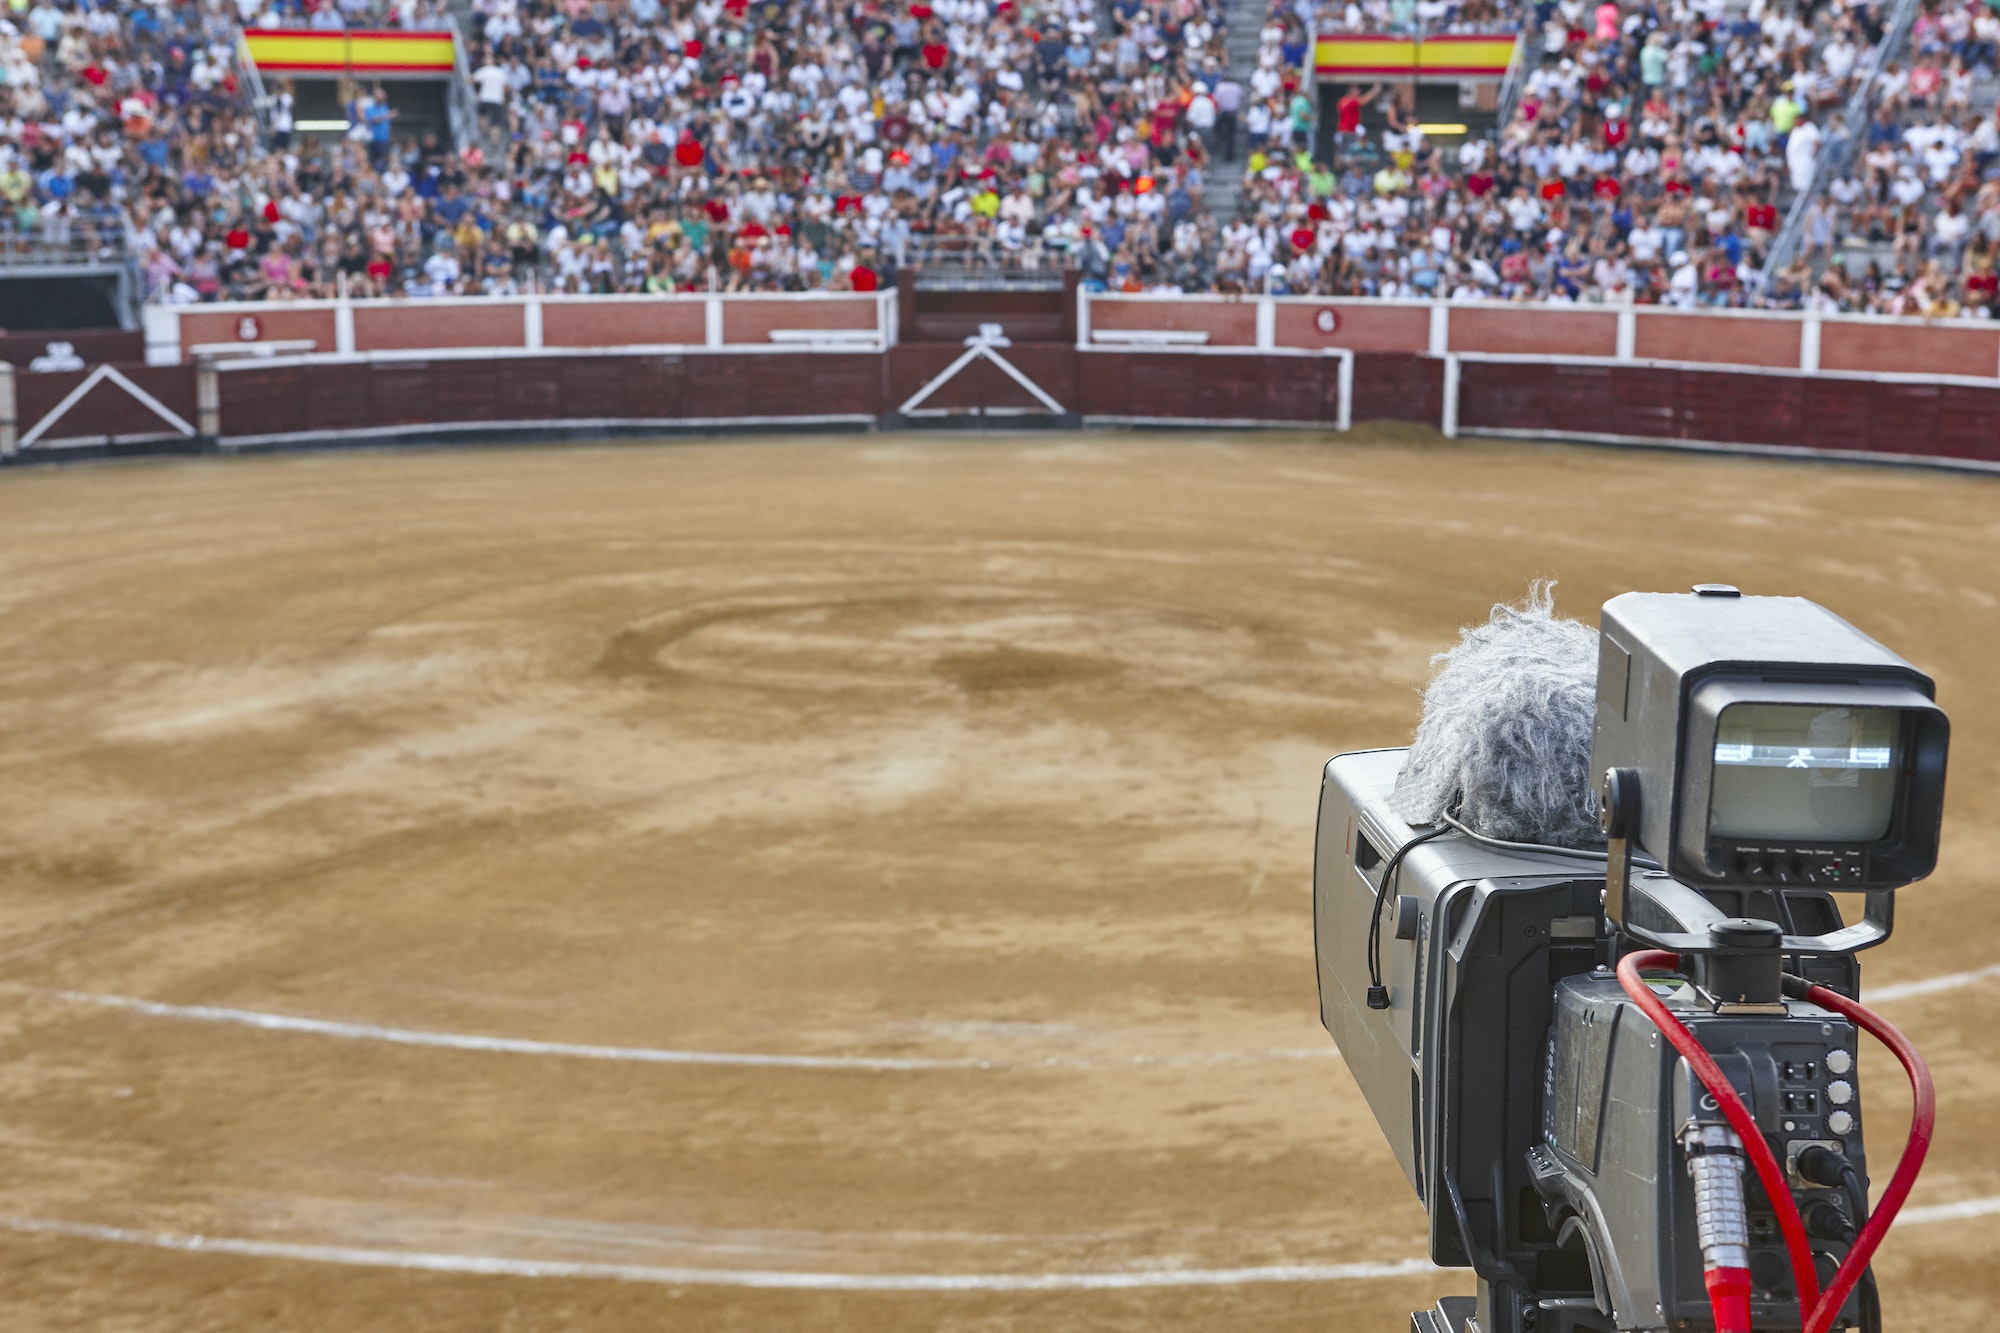 Tv set on a bullring filled with people. Bullfighting, Spain